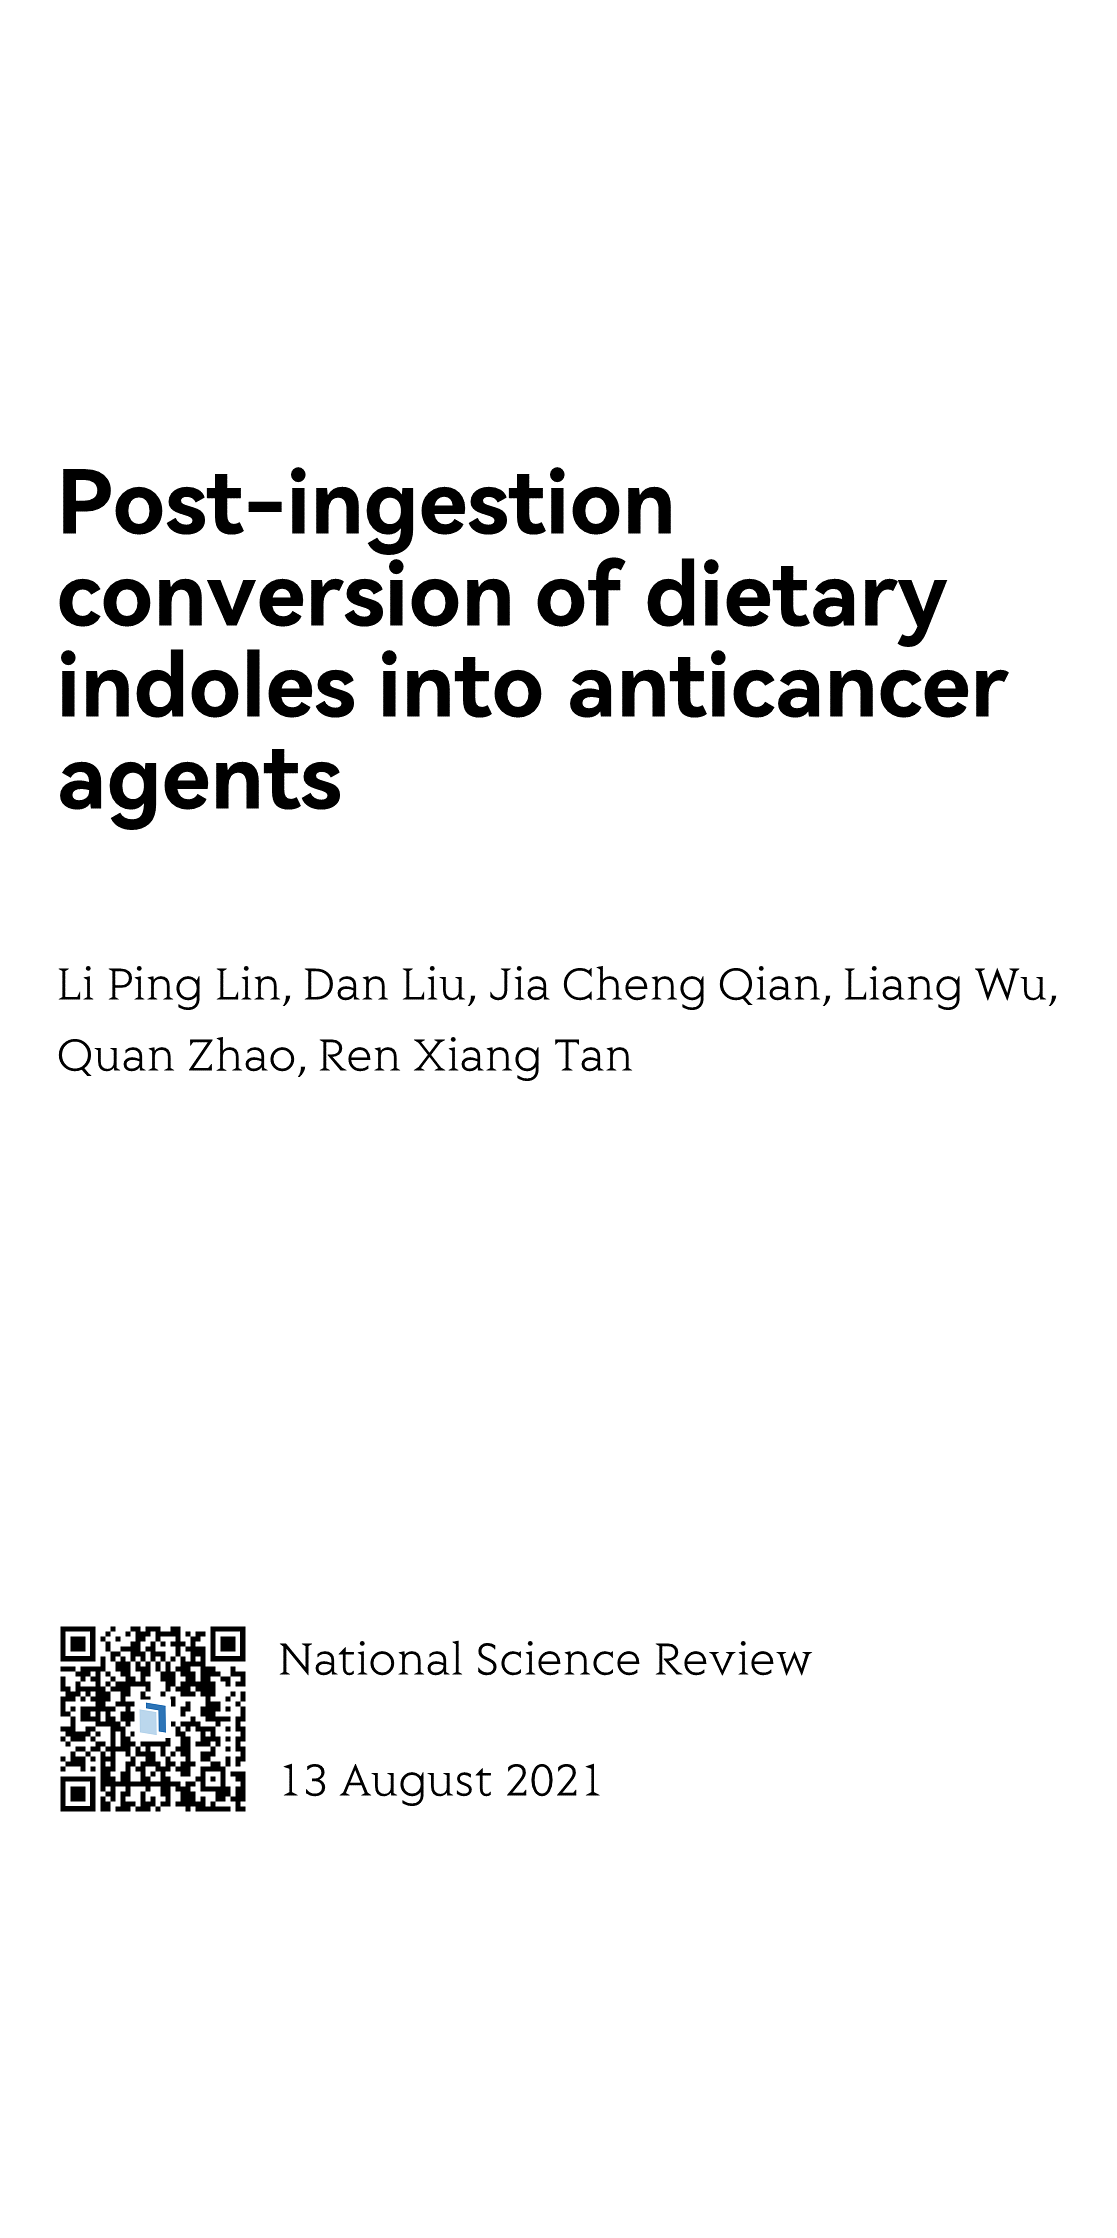 Post-ingestion conversion of dietary indoles into anticancer agents_1